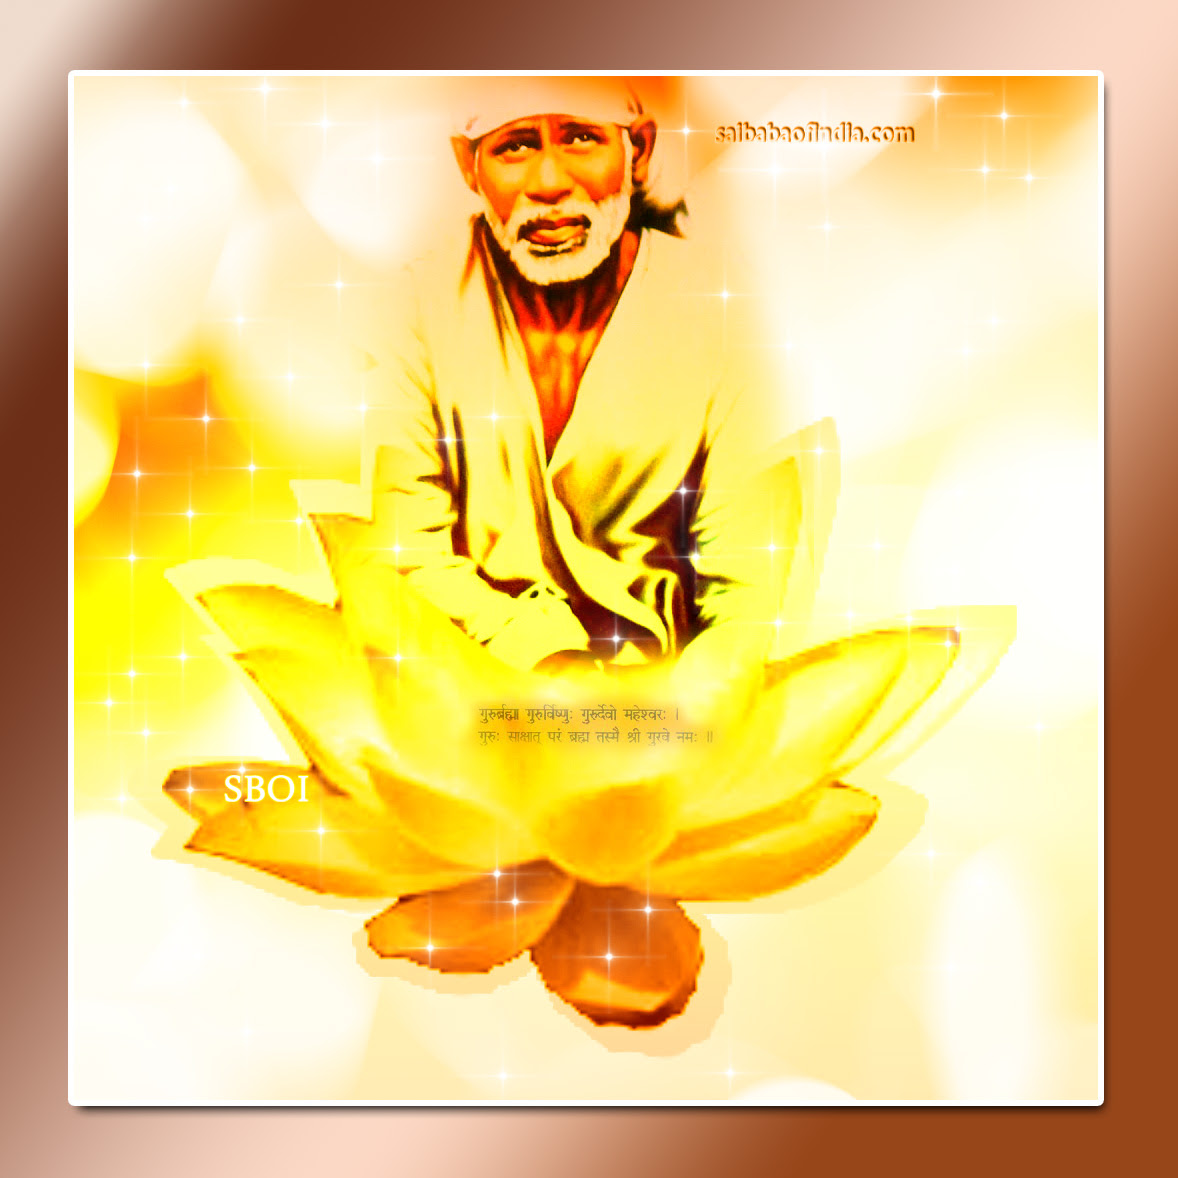 Ask sai service is a unique way to get answers from shri shirdi sai baba by asking him with shradha and saboori. Shirdi Sai Baba Answers Your Questions And Solves Your Problems